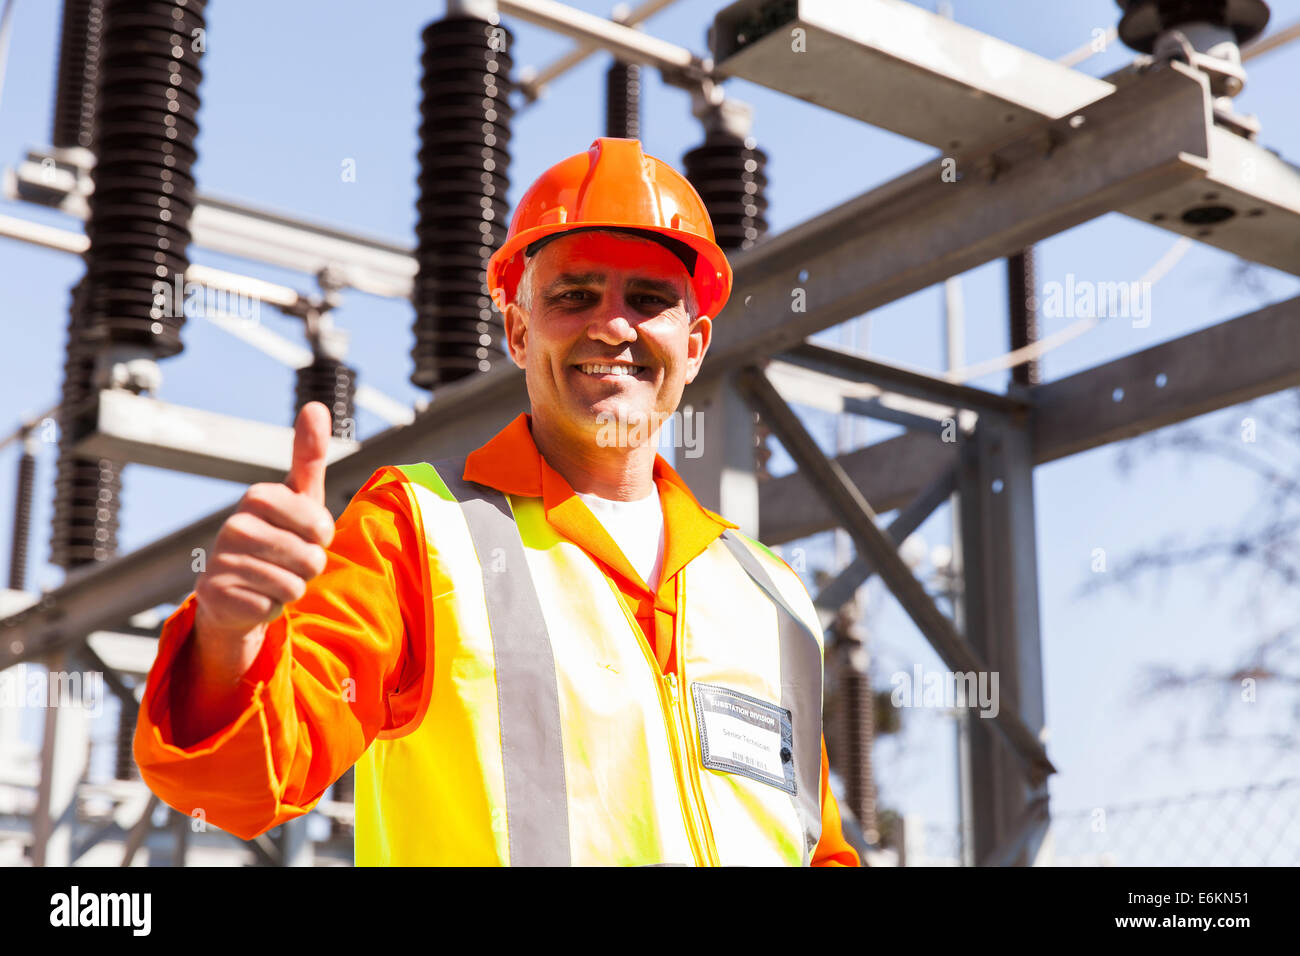 https://c8.alamy.com/comp/E6KN51/middle-aged-male-electric-engineer-in-electrical-power-plant-E6KN51.jpg